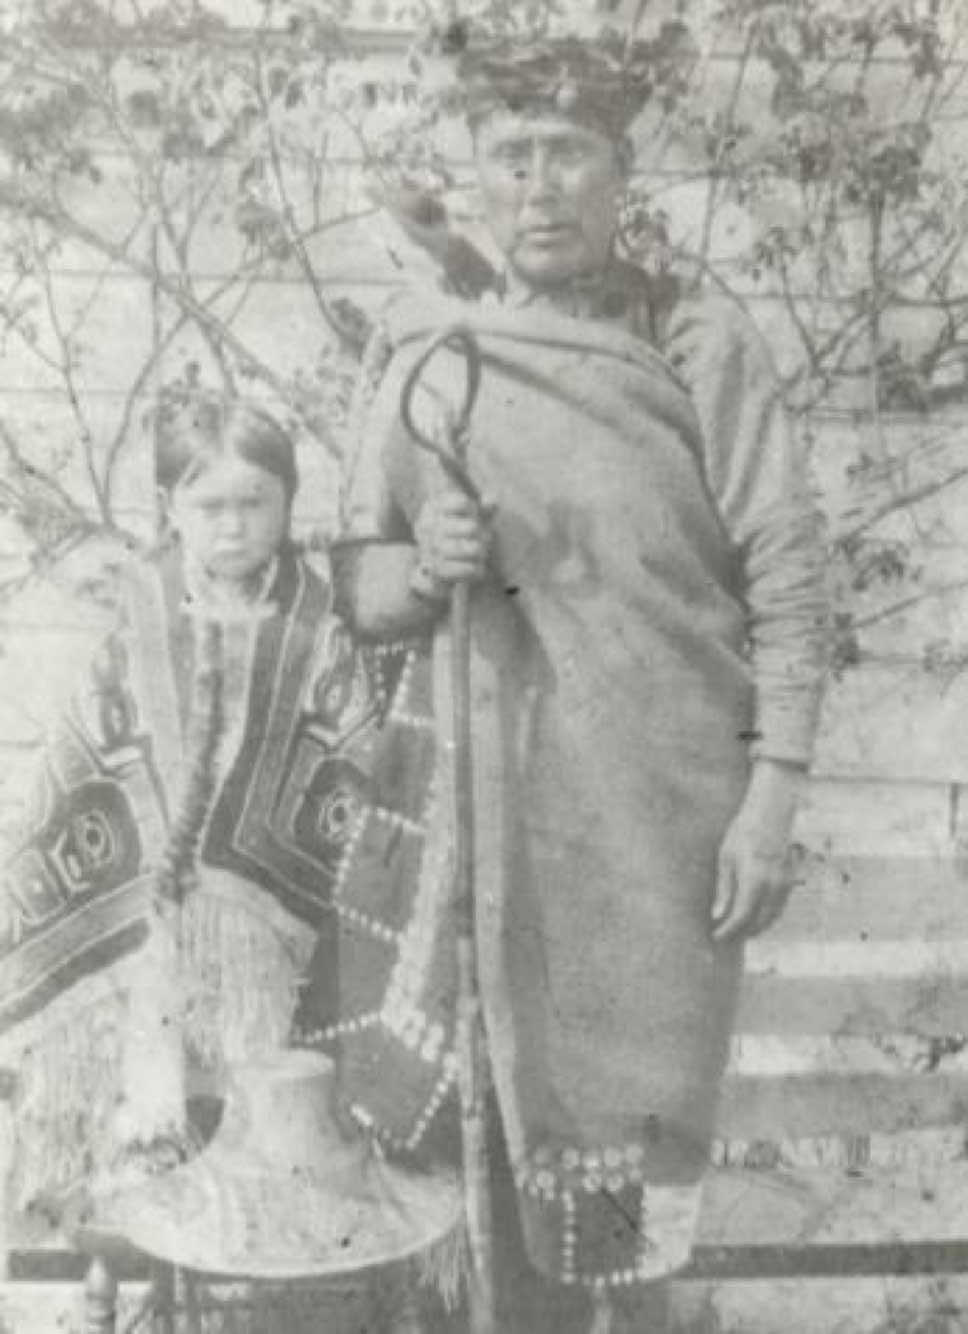 Black and white photograph of Tsandigam Nege' - Harry Mountain wearing cedar regalia standing beside child in button blanket